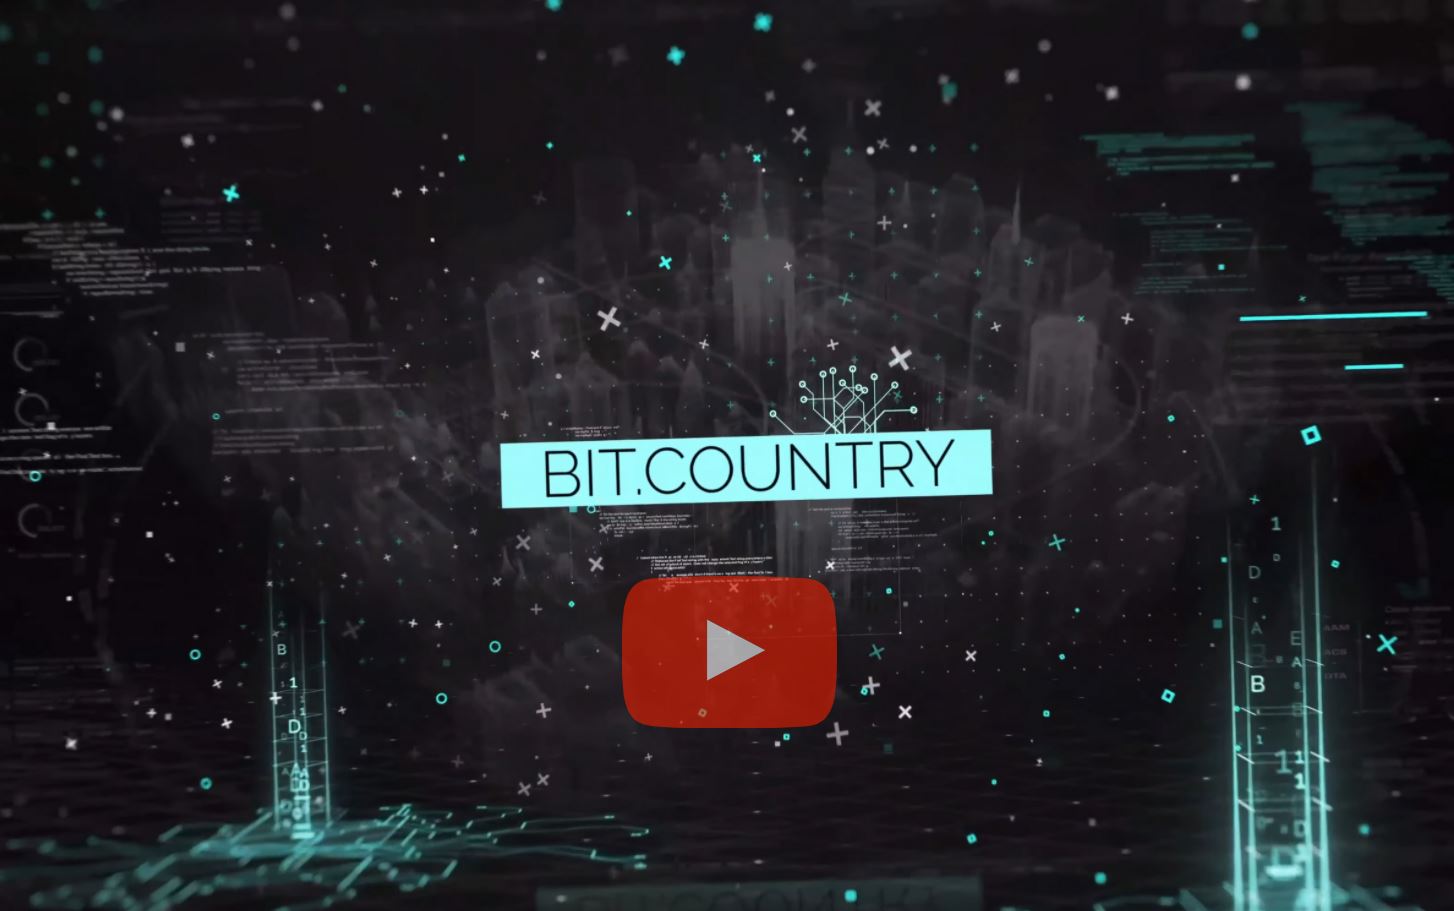 Watch Bit.Country Video